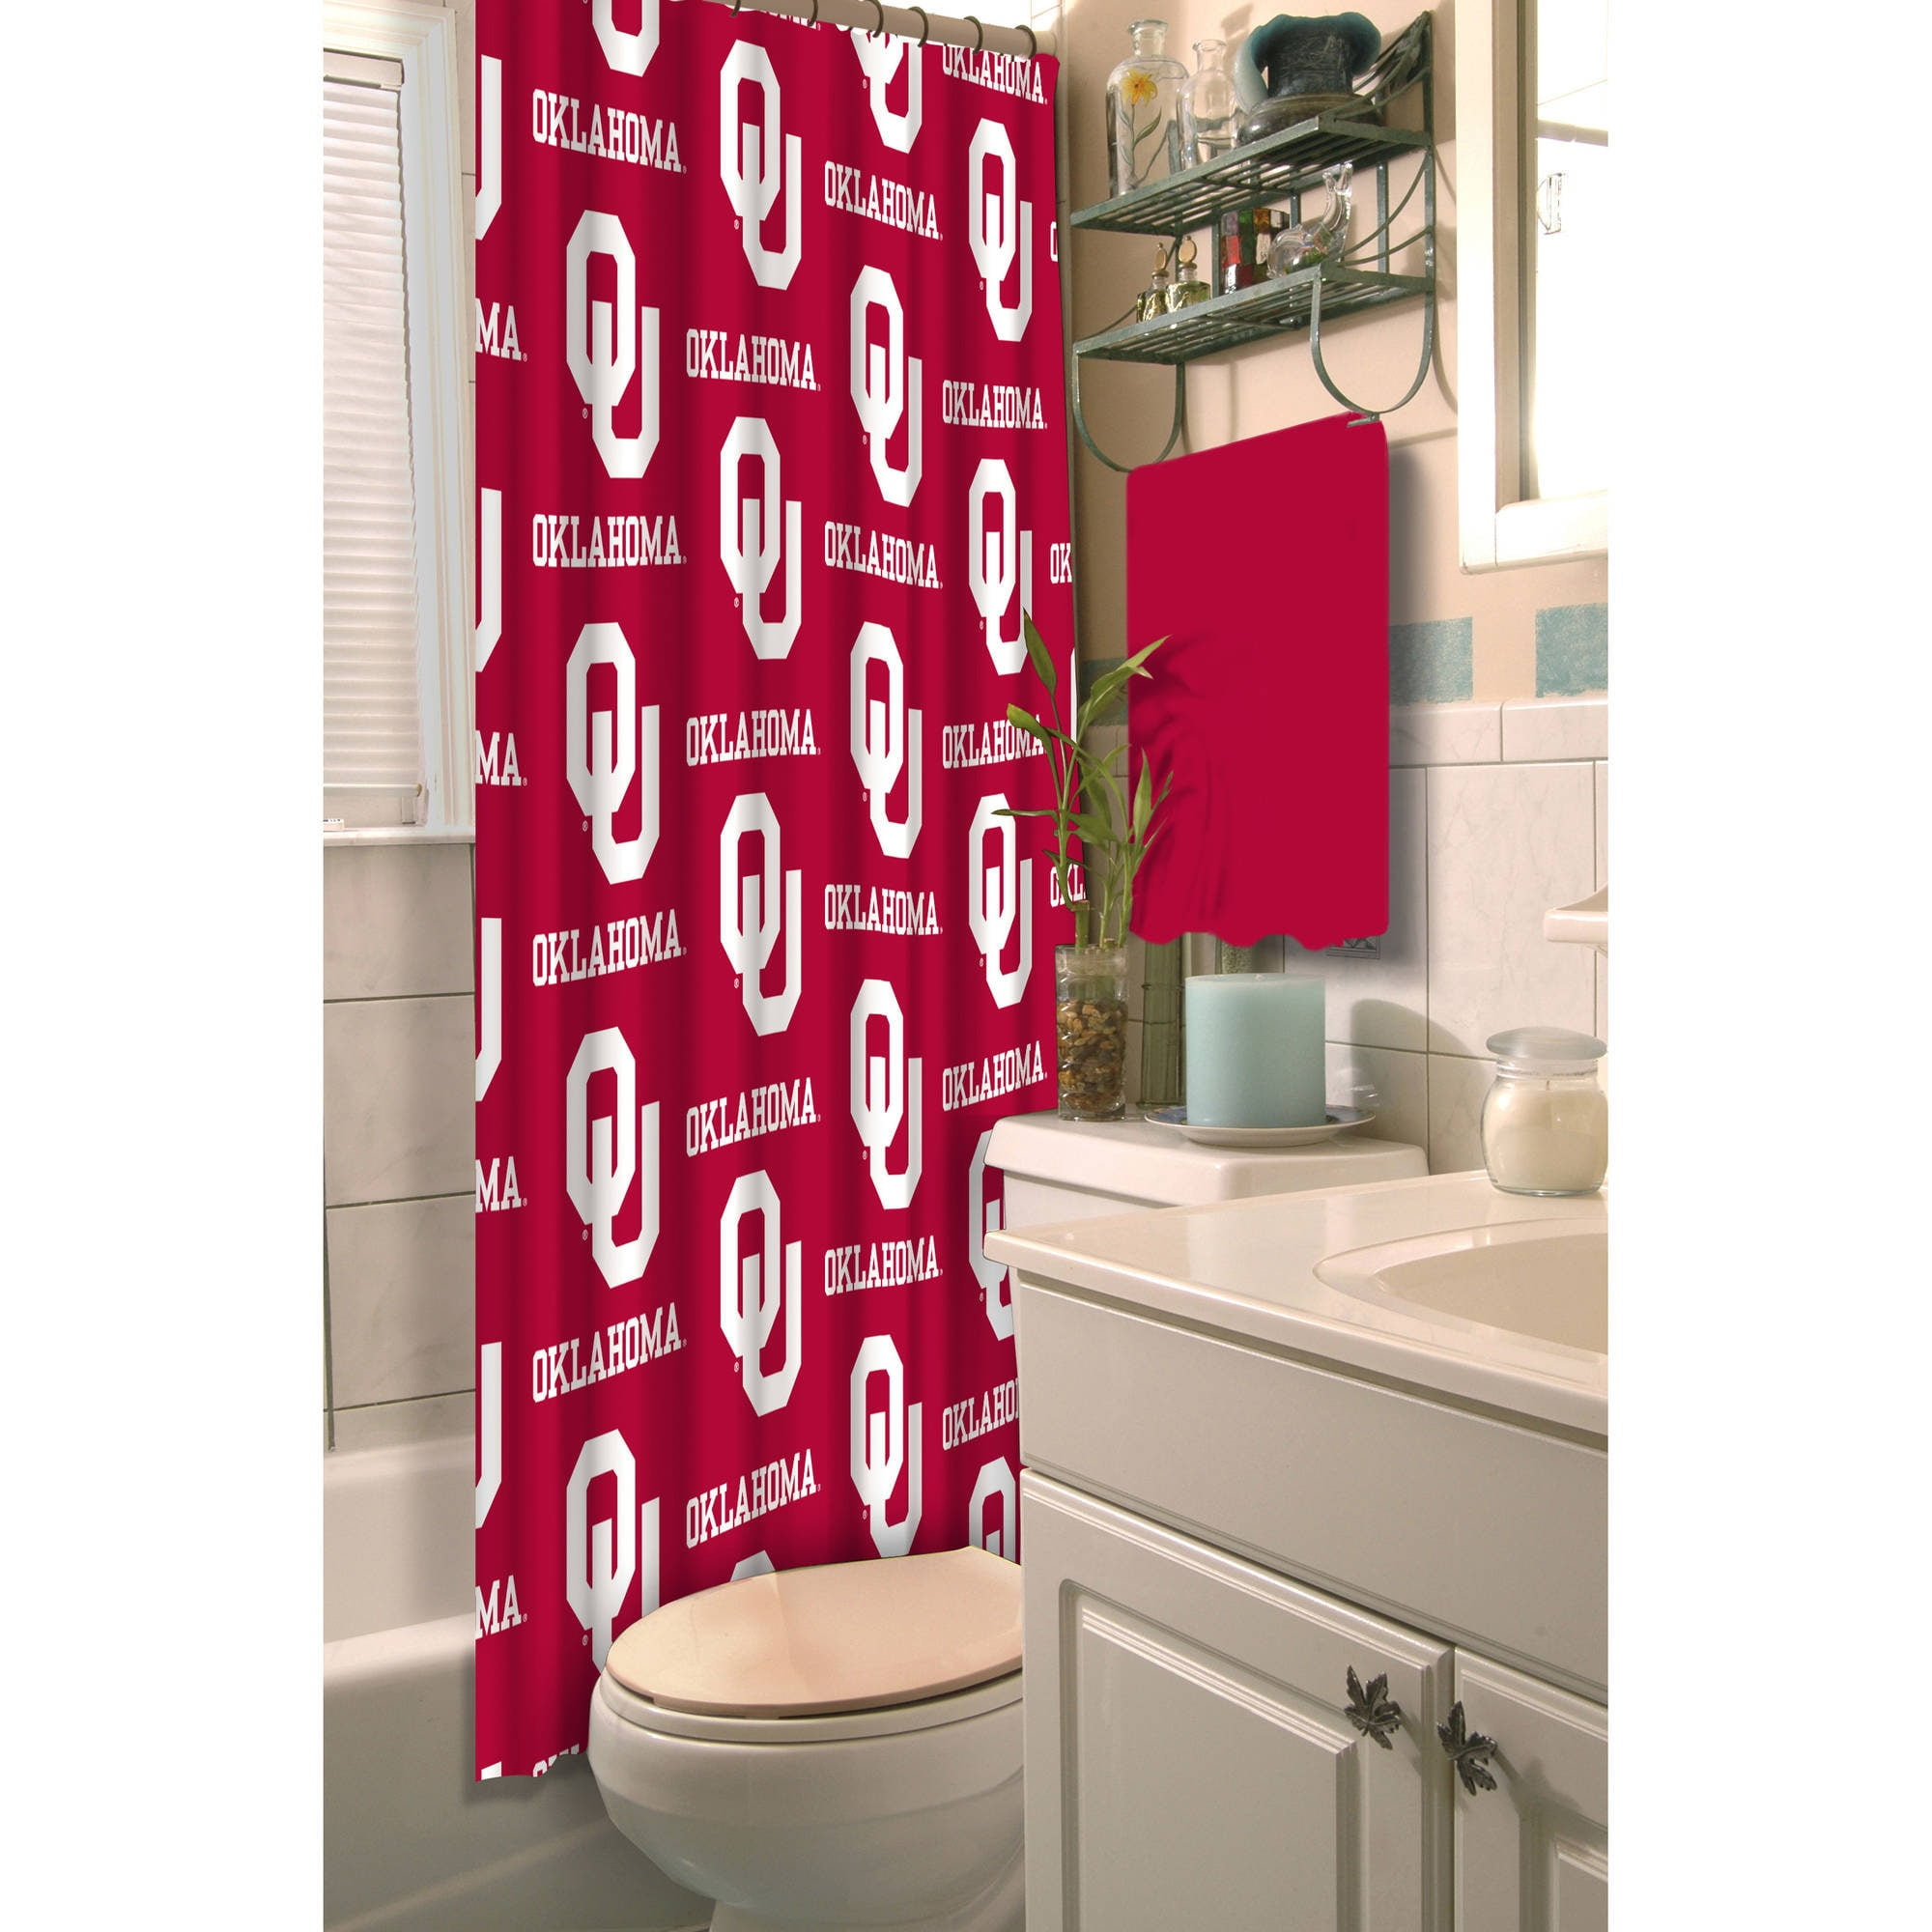 Oklahoma Sooners Shower Curtain American School University Bath Curtain Sport Shower Curtain Polyester Decoration with Hooks 69x70 Inch 